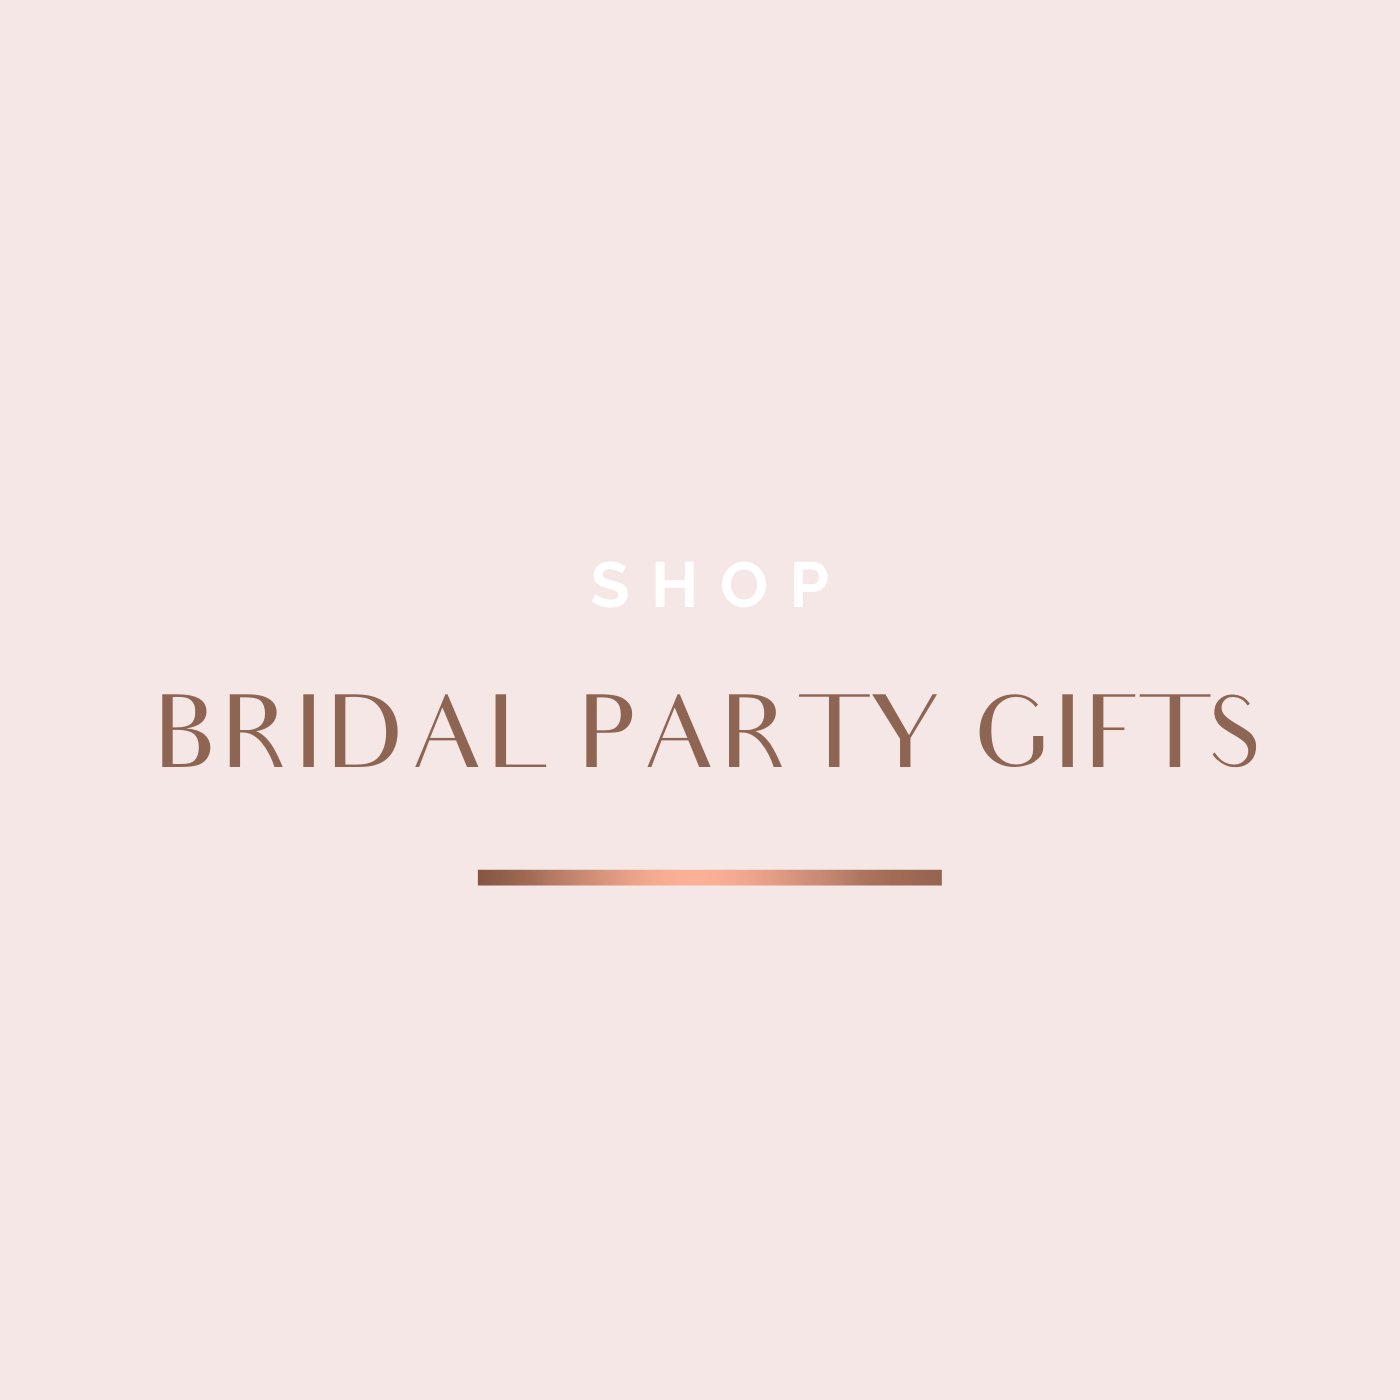 Wedding & Bridal Party Gifts